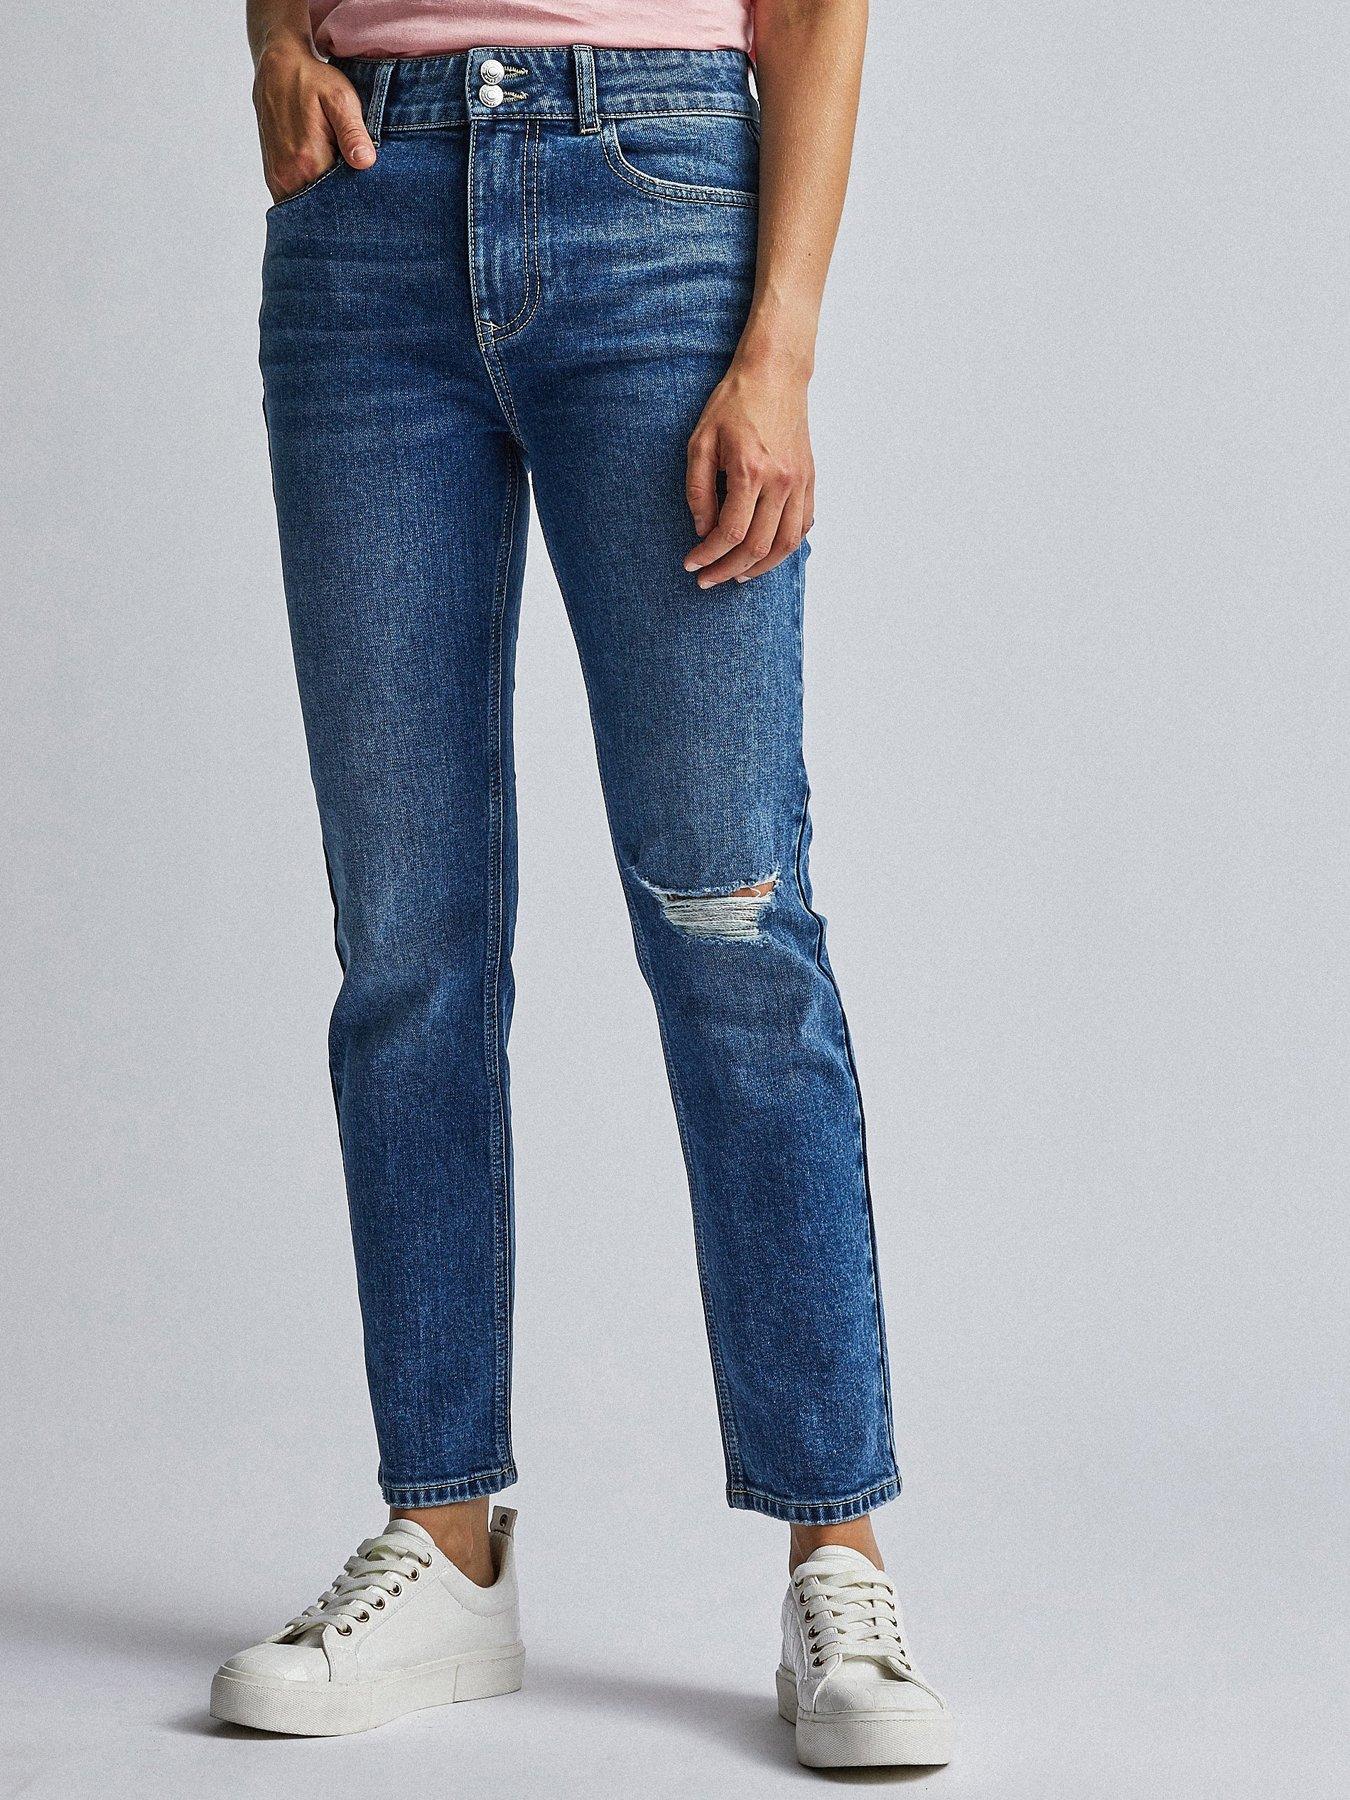 dorothy perkins ripped jeans